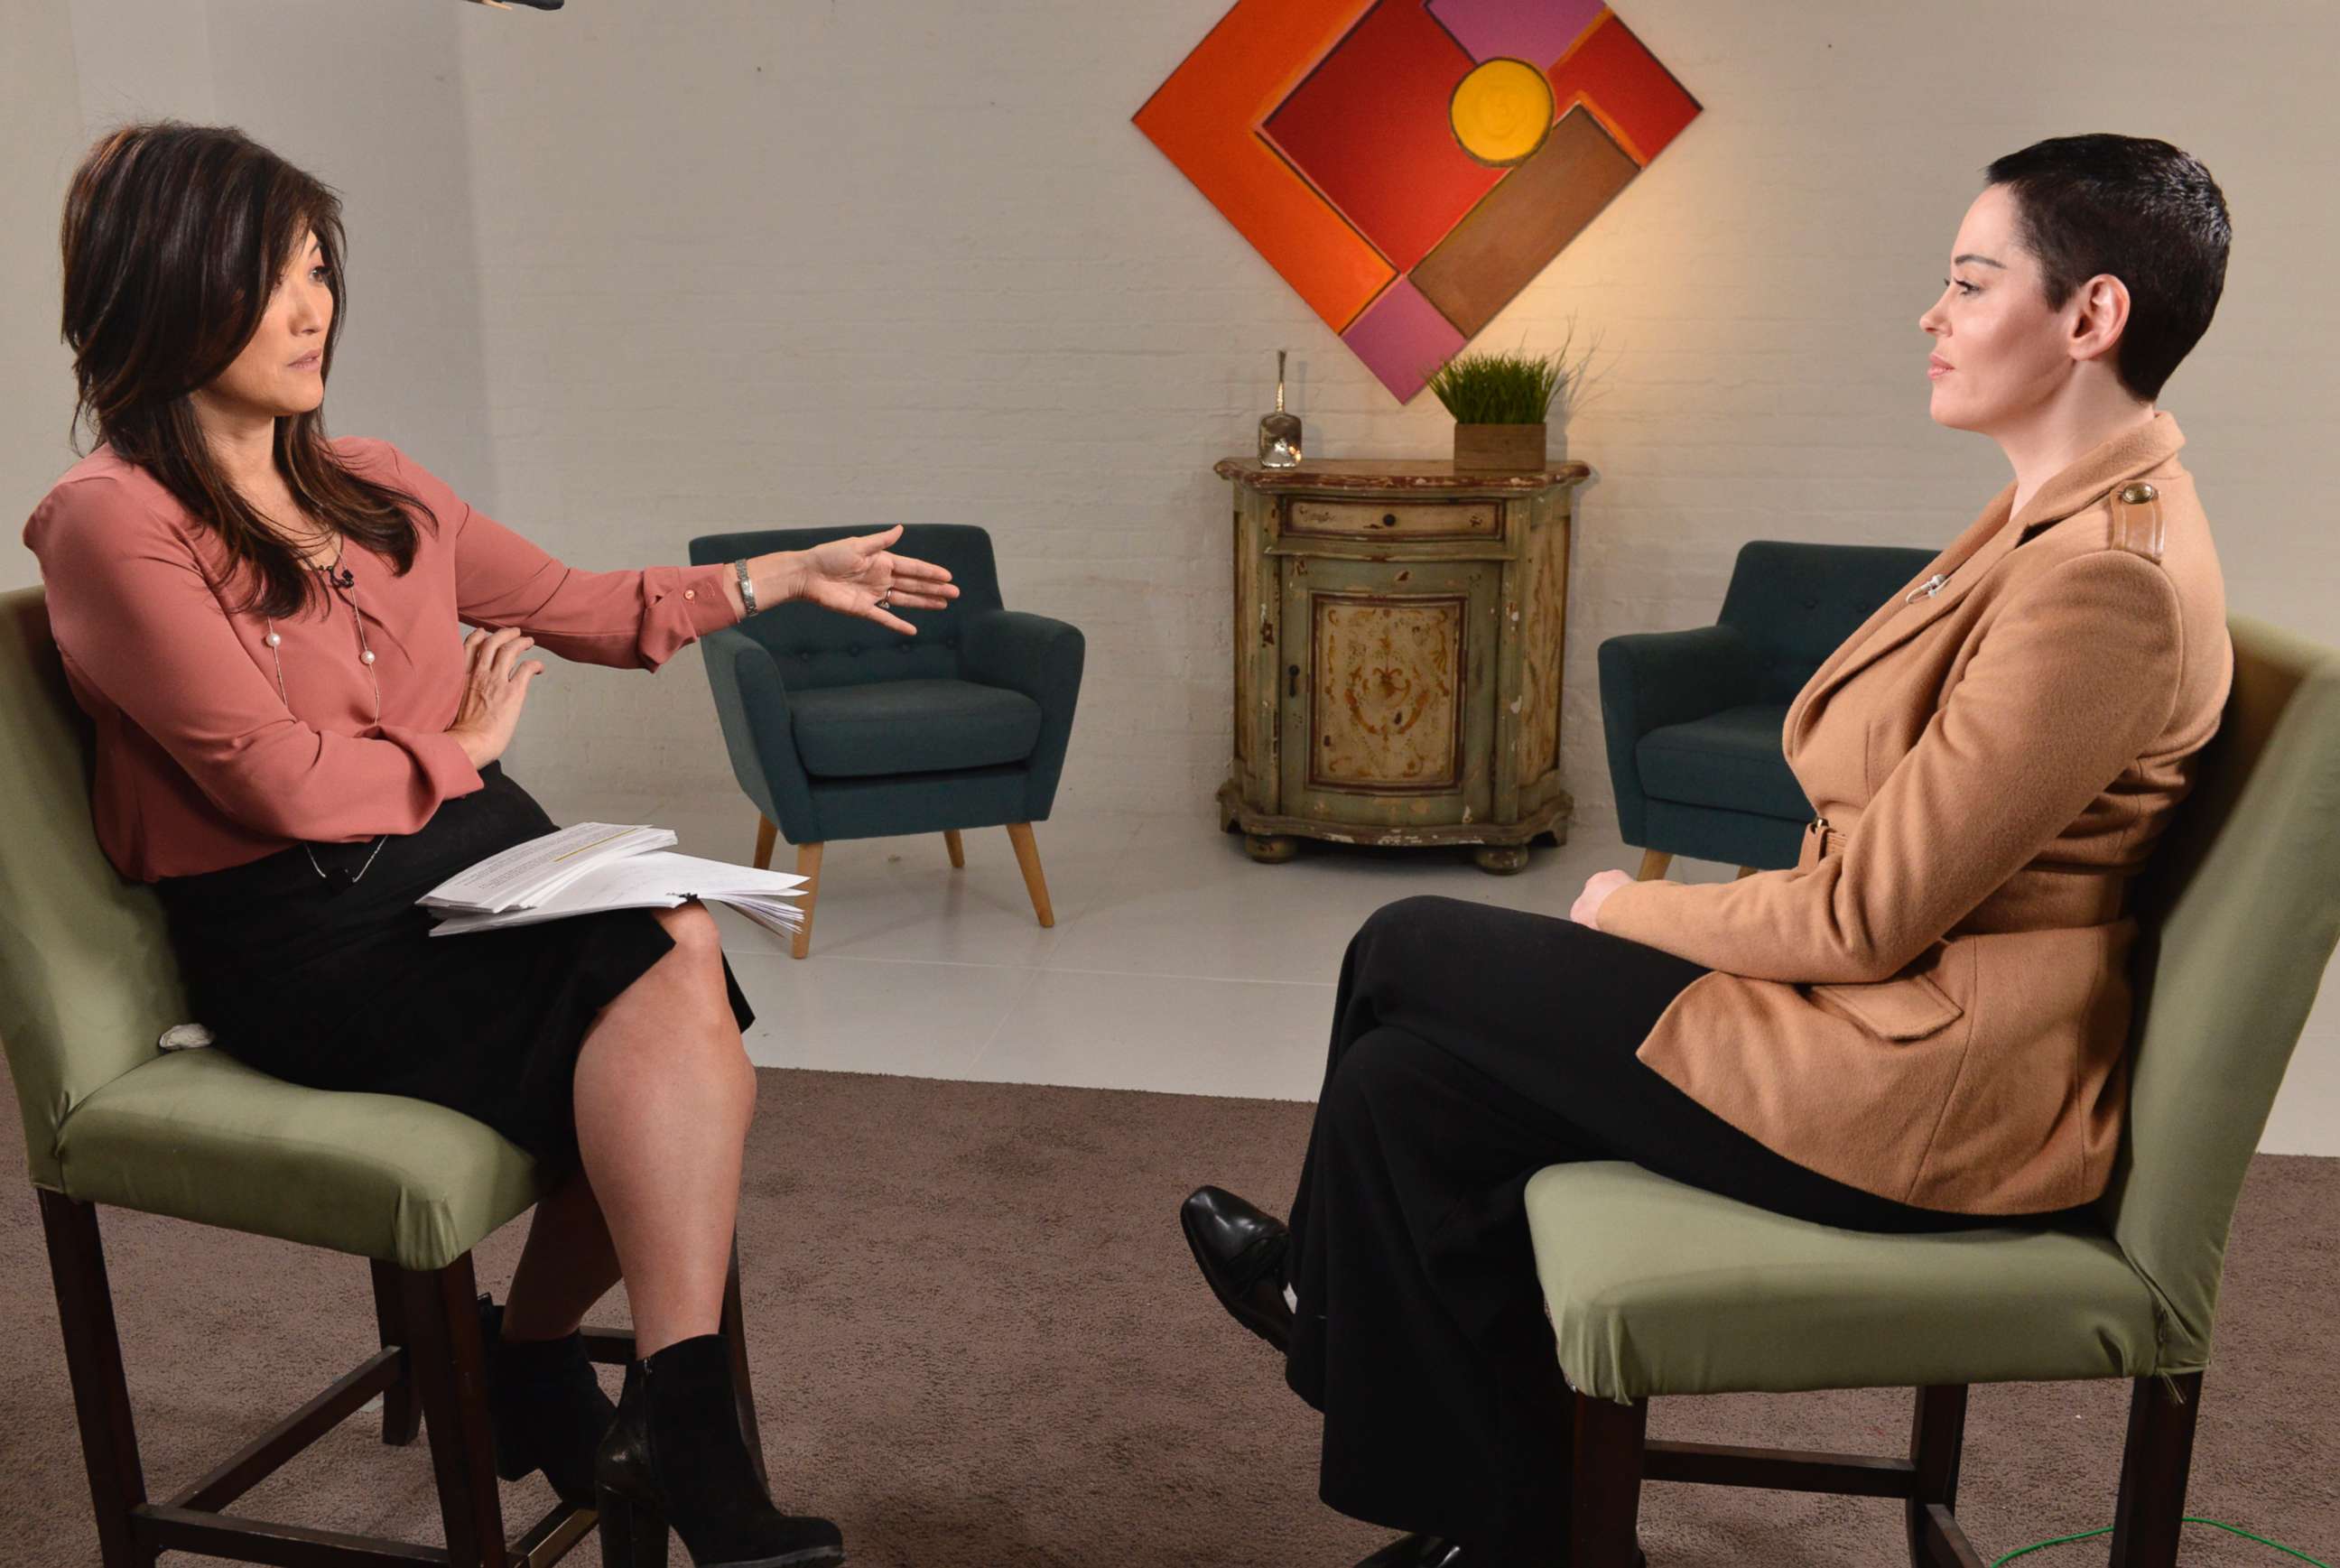 PHOTO: ABC News "Nightline" co-anchor Juju Chang sat down for an extensive interview with Rose McGowan about her new book "Brave" and McGowan's allegations that Harvey Weinstein raped her.